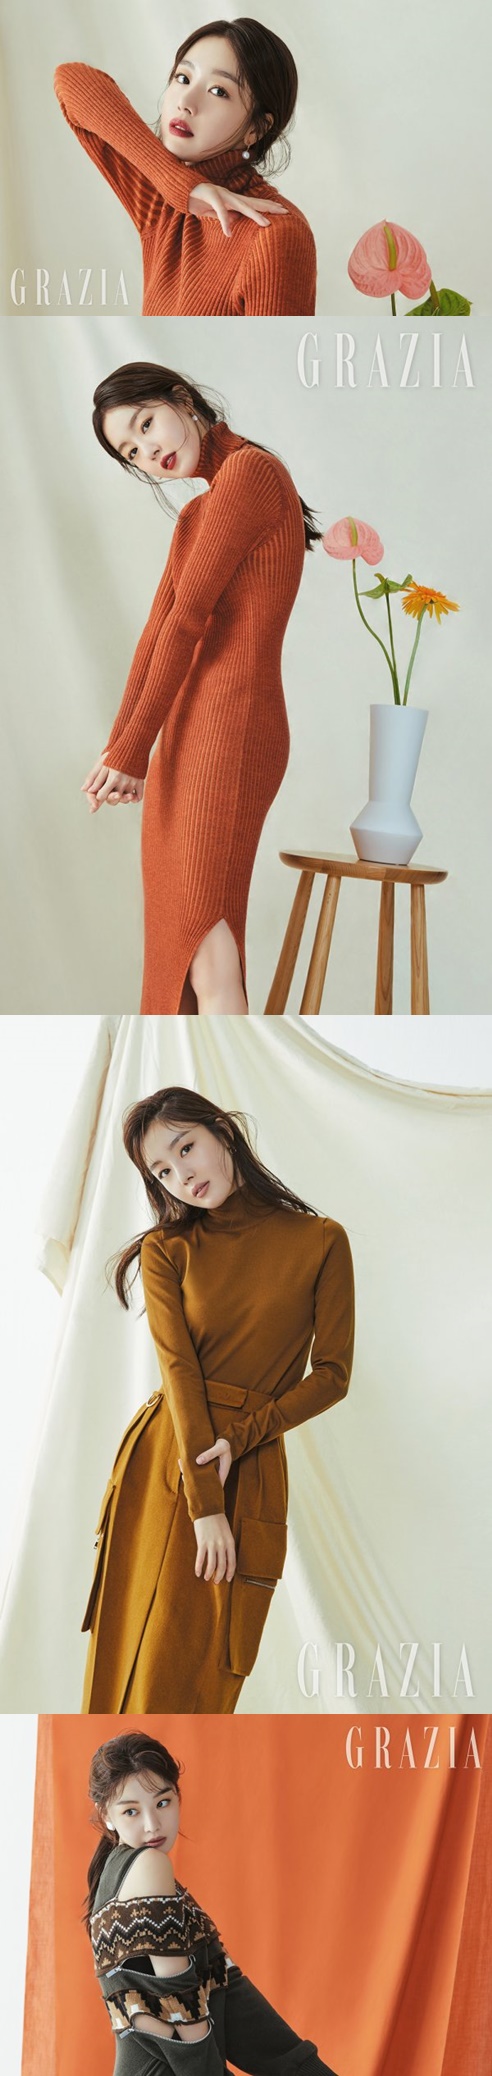 Actor Han Sun-hwa has decorated the November issue of fashion magazine Maria Grazia Cucinotta.This picture, which emphasizes the subtle toffe color and brown color makeup, features the soft and fascinating beauty of Han Sun-hwa.It has been reborn as an atmosphere of autumn goddess, perfecting the beauty look of various brown color points with eyes and lips.In an interview with Maria Grazia Cucinotta, she was able to hear her true story growing one step further as an Actor.When asked what the changes were as I started acting, I said, I was worried because I had a responsibility and homework to deal with myself rather than when I was young.There are many things that are cautious and more cautious. I feel matured because of these inner changes. I am so proud of seeing my brother (Han Seung-woo), who started his activities as an X-won.I tried not to tell my brother who just started to think that my sister, my sister, should not be a stumbling block.I cheered and encouraged him to step up and step up on his own, he said. The whiteness of the face and the hardness of trying to work resemble each other.Meanwhile, Han Sun-hwa has recently confirmed her appearance in an independent feature film and is set to start filming soon.Her interviews with her pictures can be found in the November issue of Maria Grazia Cucinotta magazine.